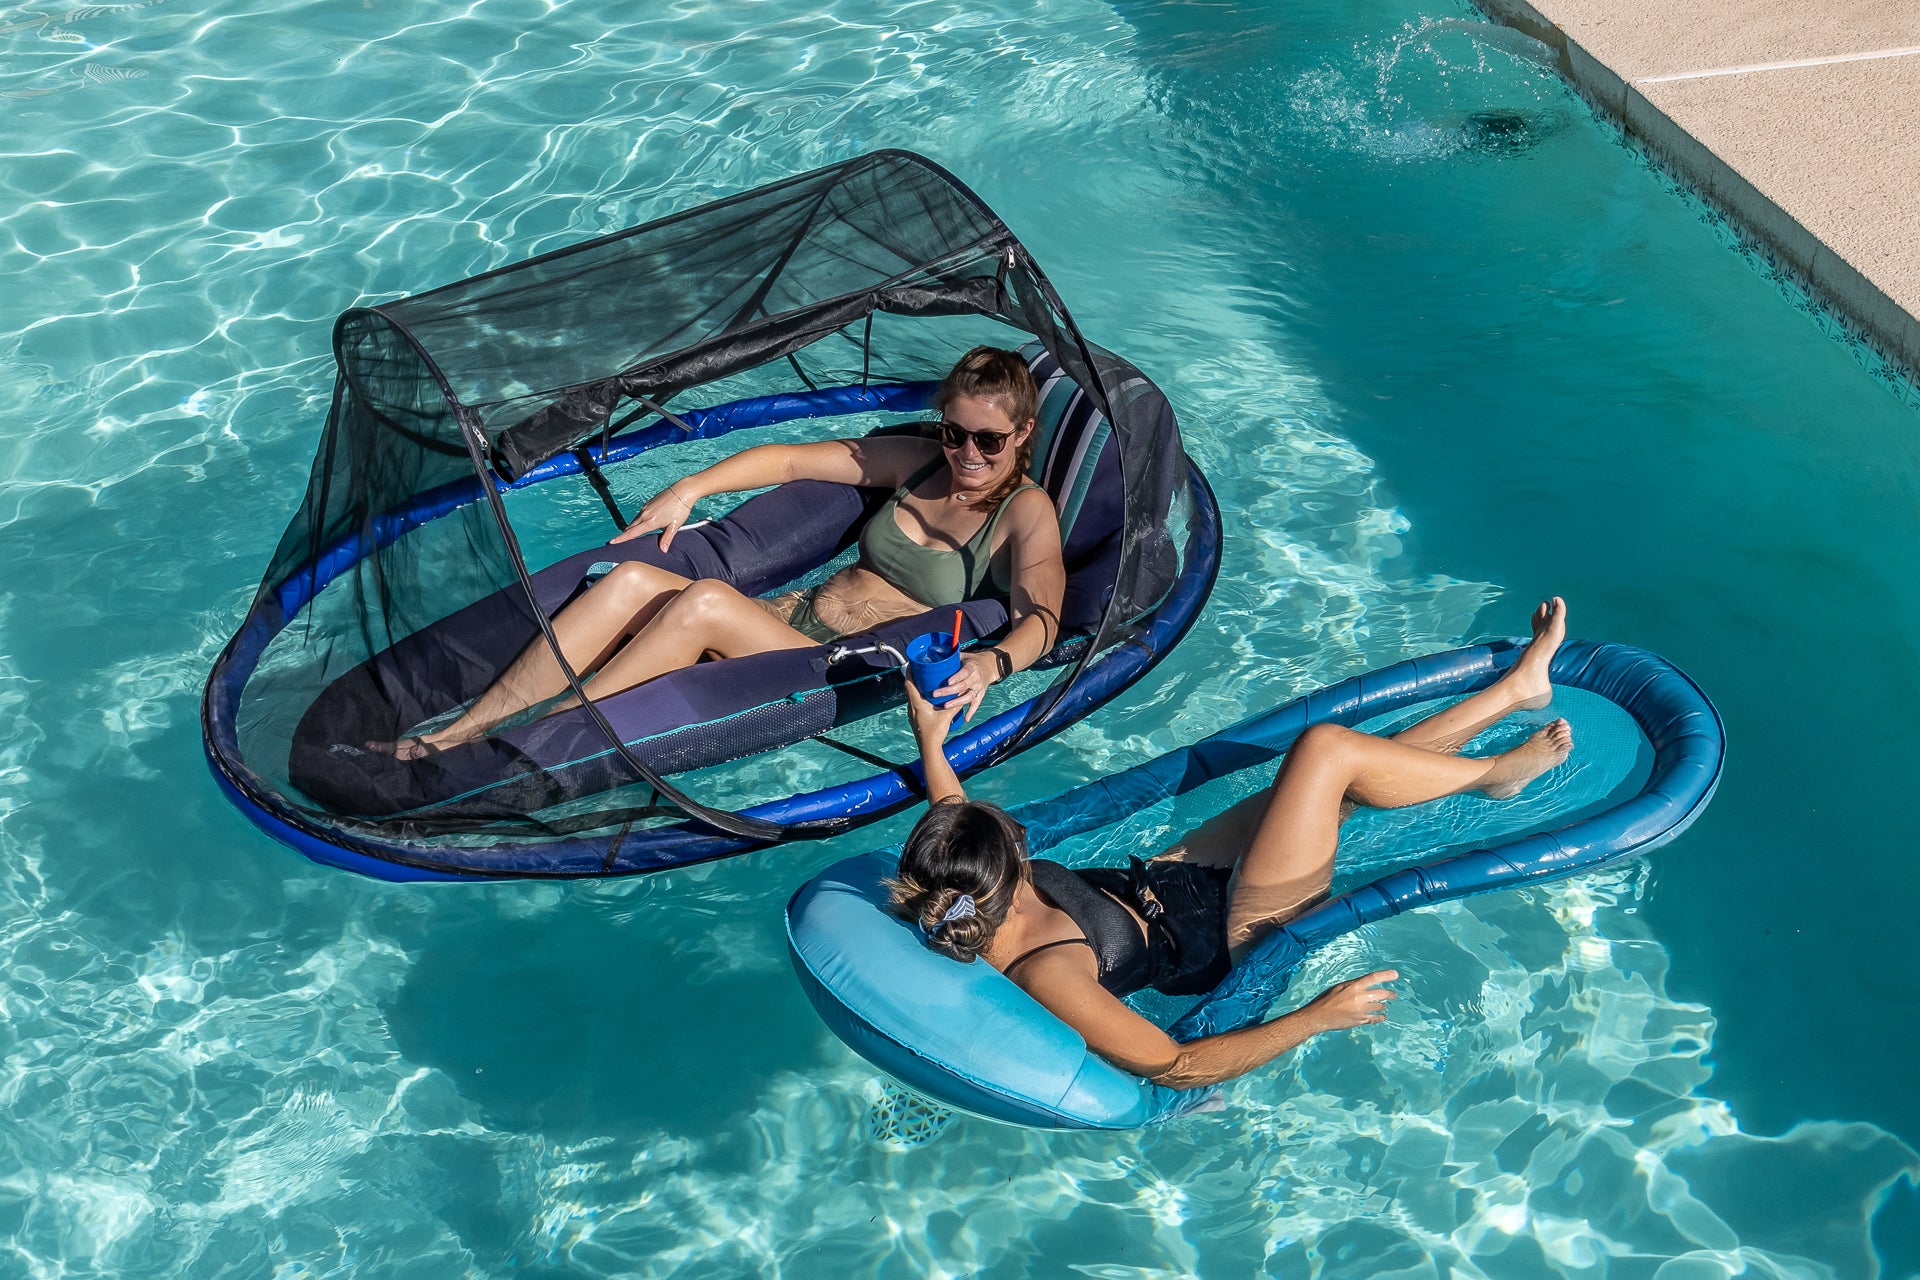 Two girls on pool floats, one with Pest Awaysis being shielded from sunlight and disruptive bugs.